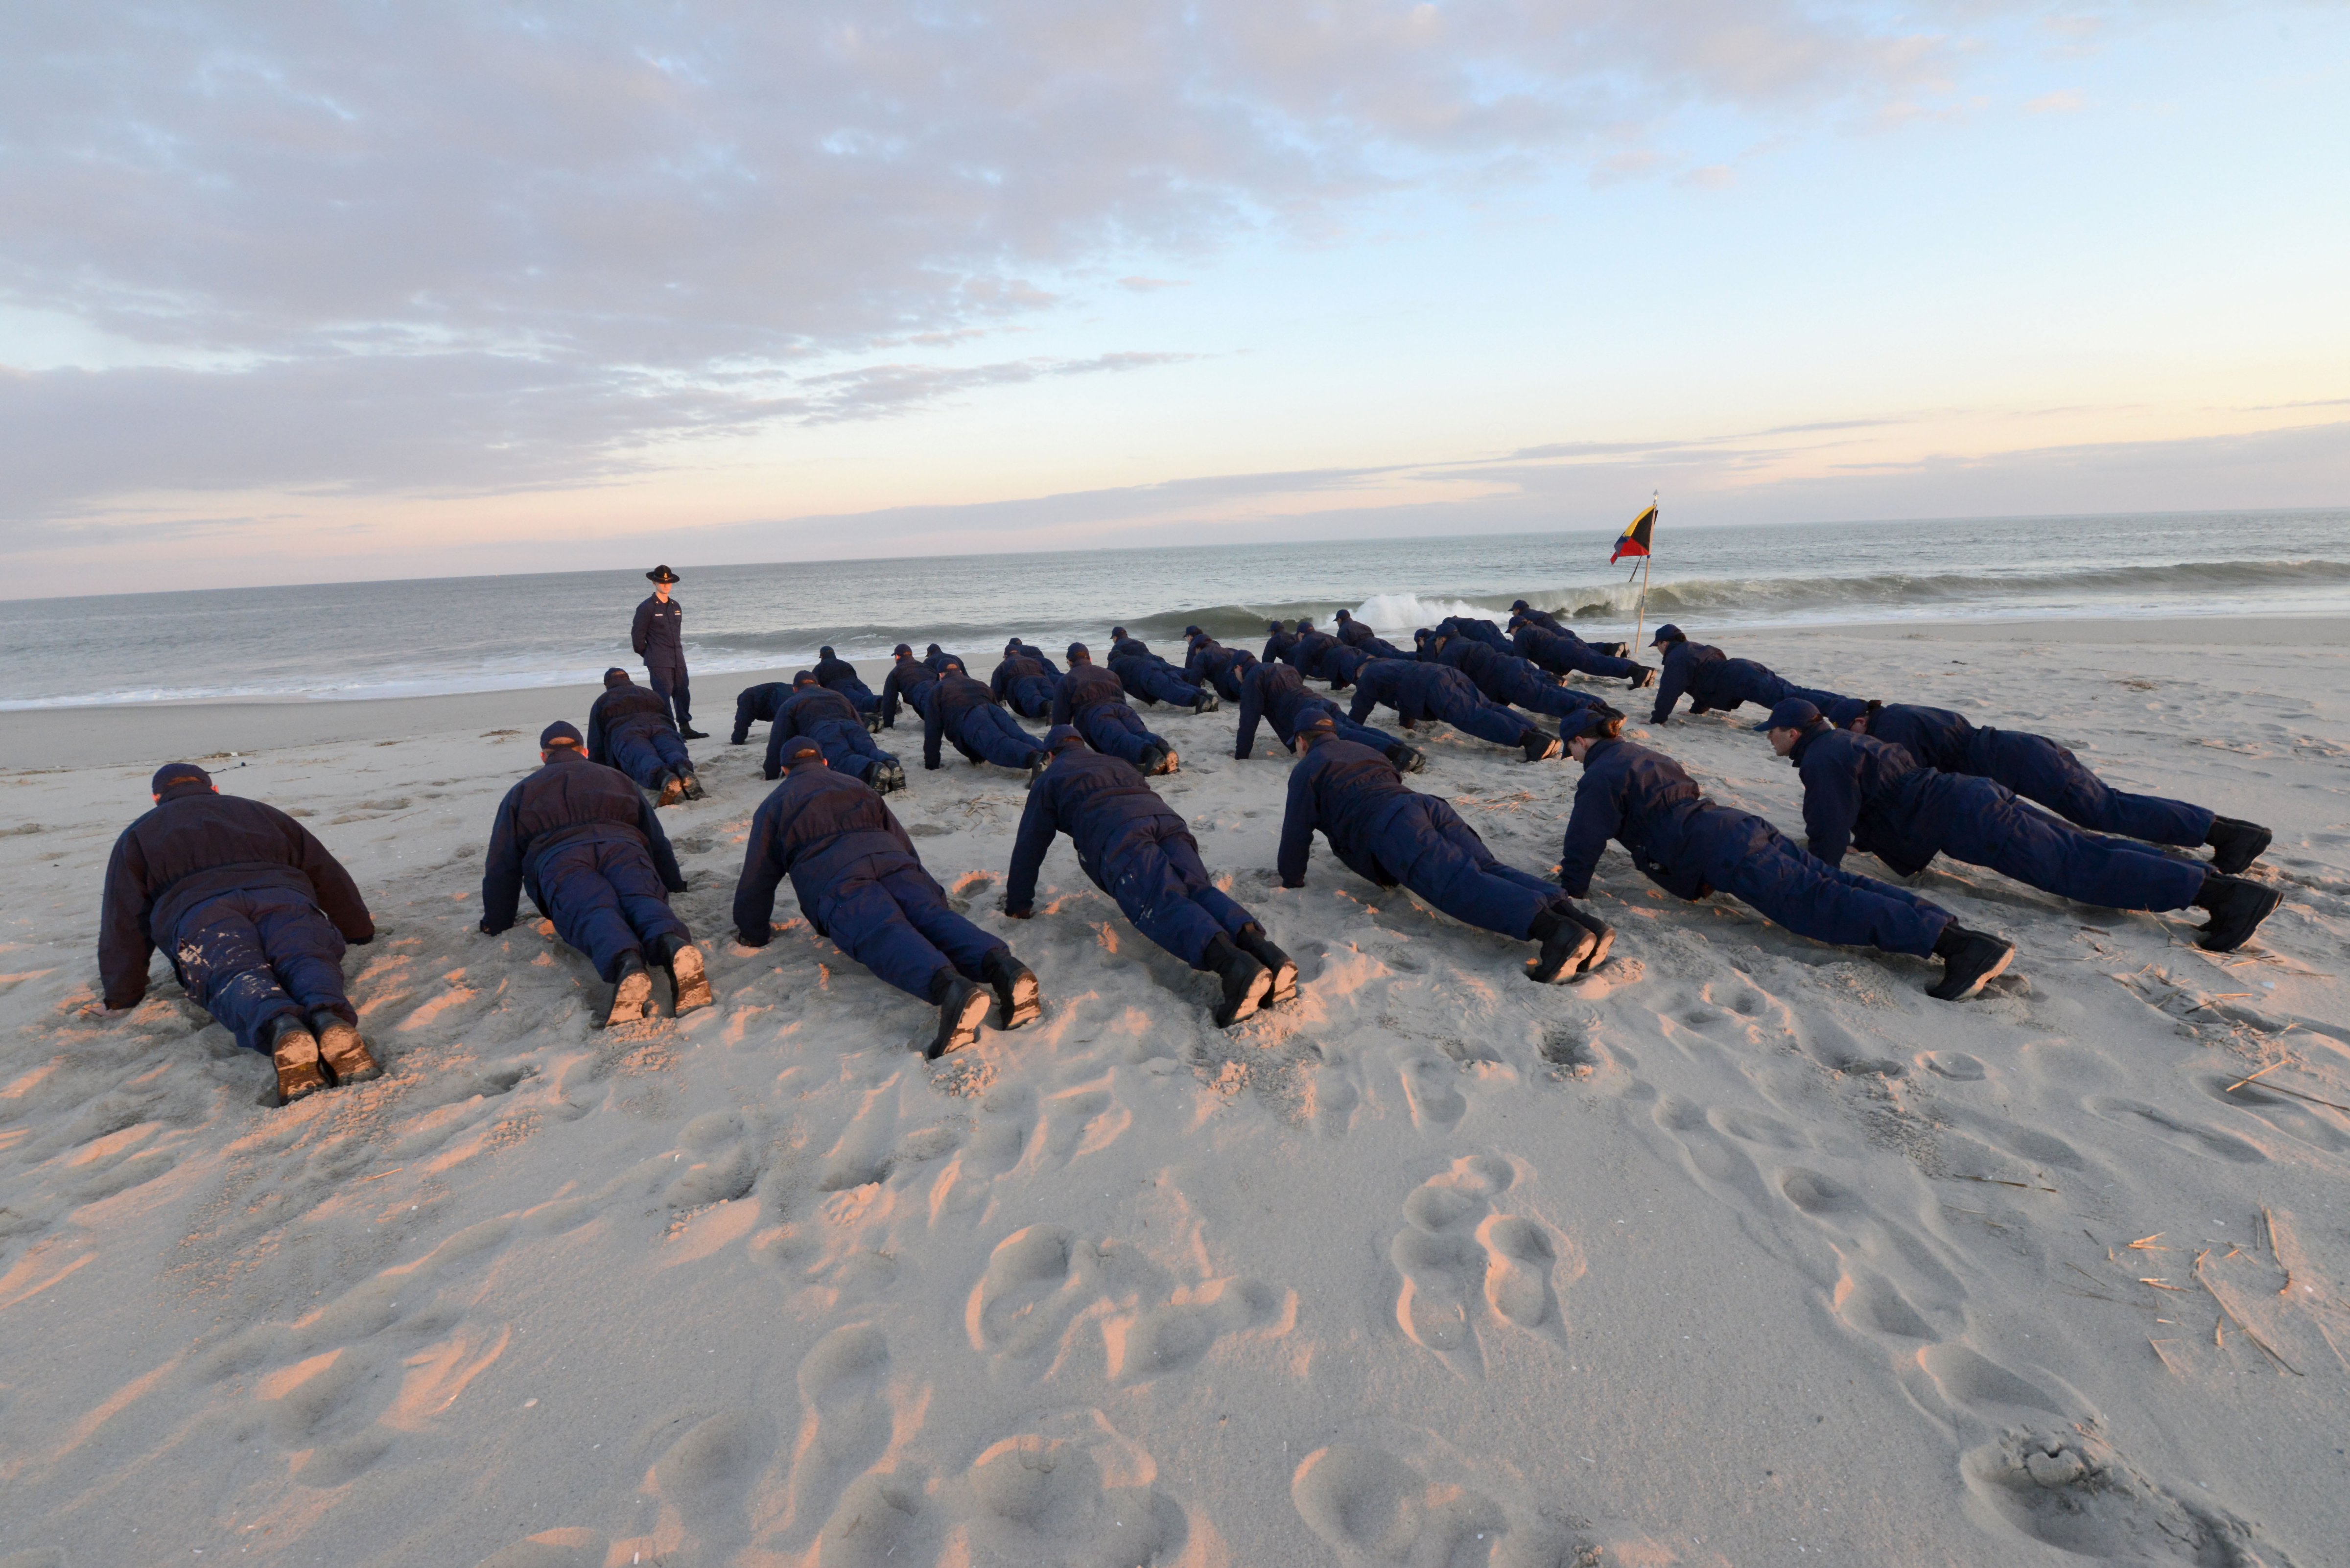 Recruits at the Coast Guard's boot camp in Cape May, N.J., do pushups on the beach. (Chief Warrant Officer Donnie Brzuska / Coast Guard)